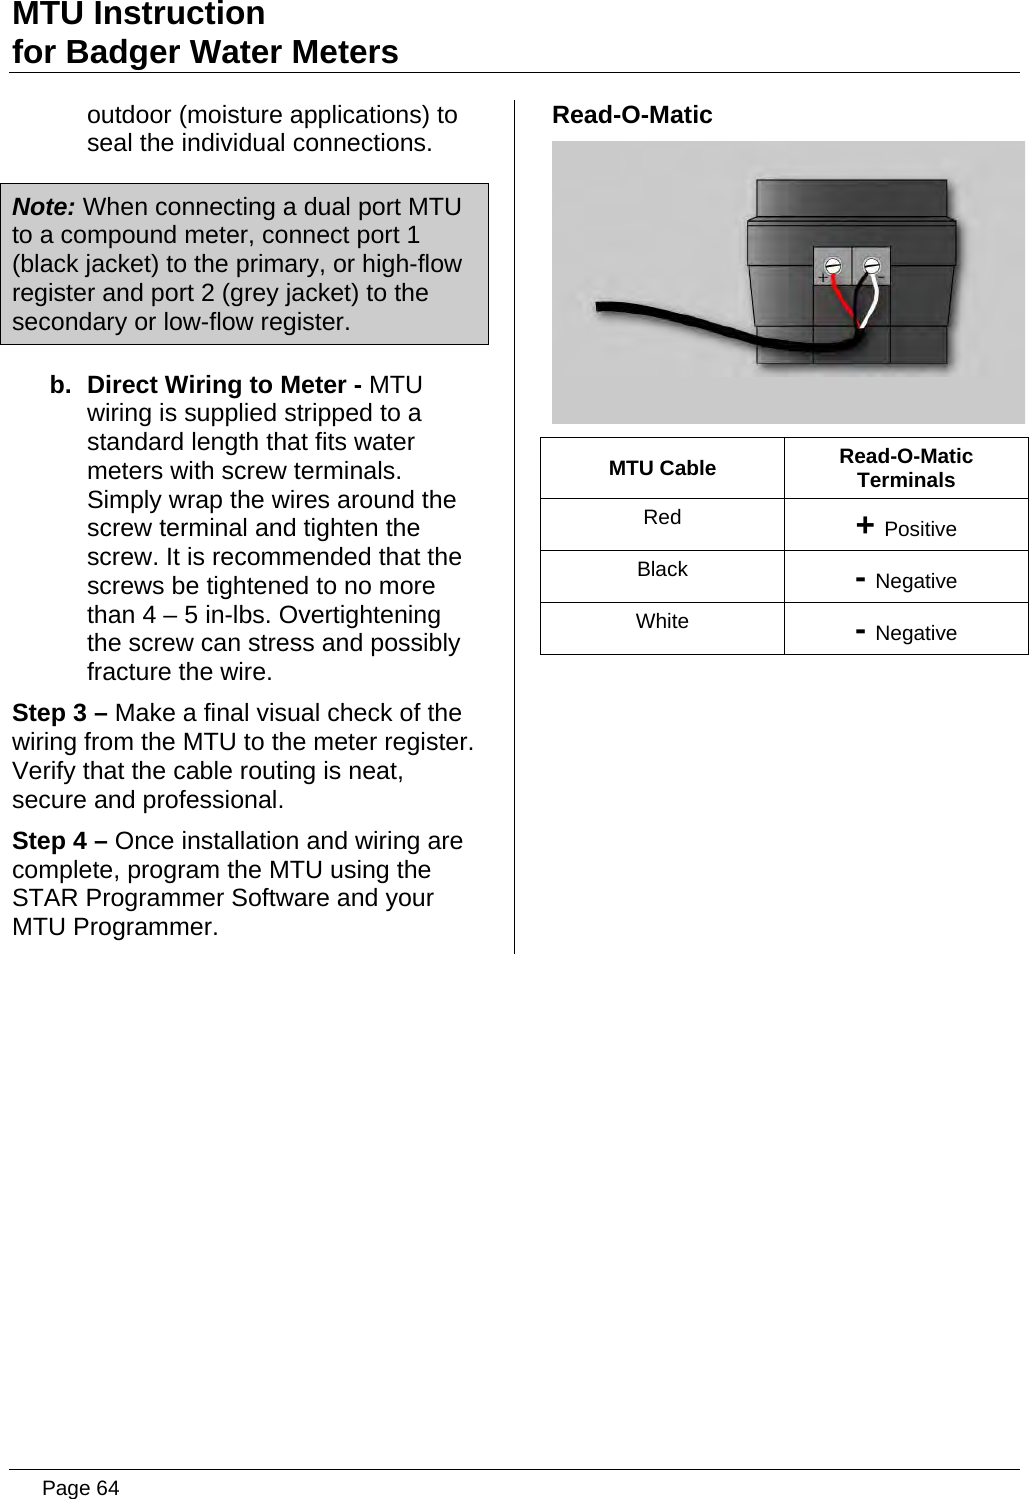 Page 64 of Aclara Technologies 09015 Transmitter for Meter Reading User Manual users manual